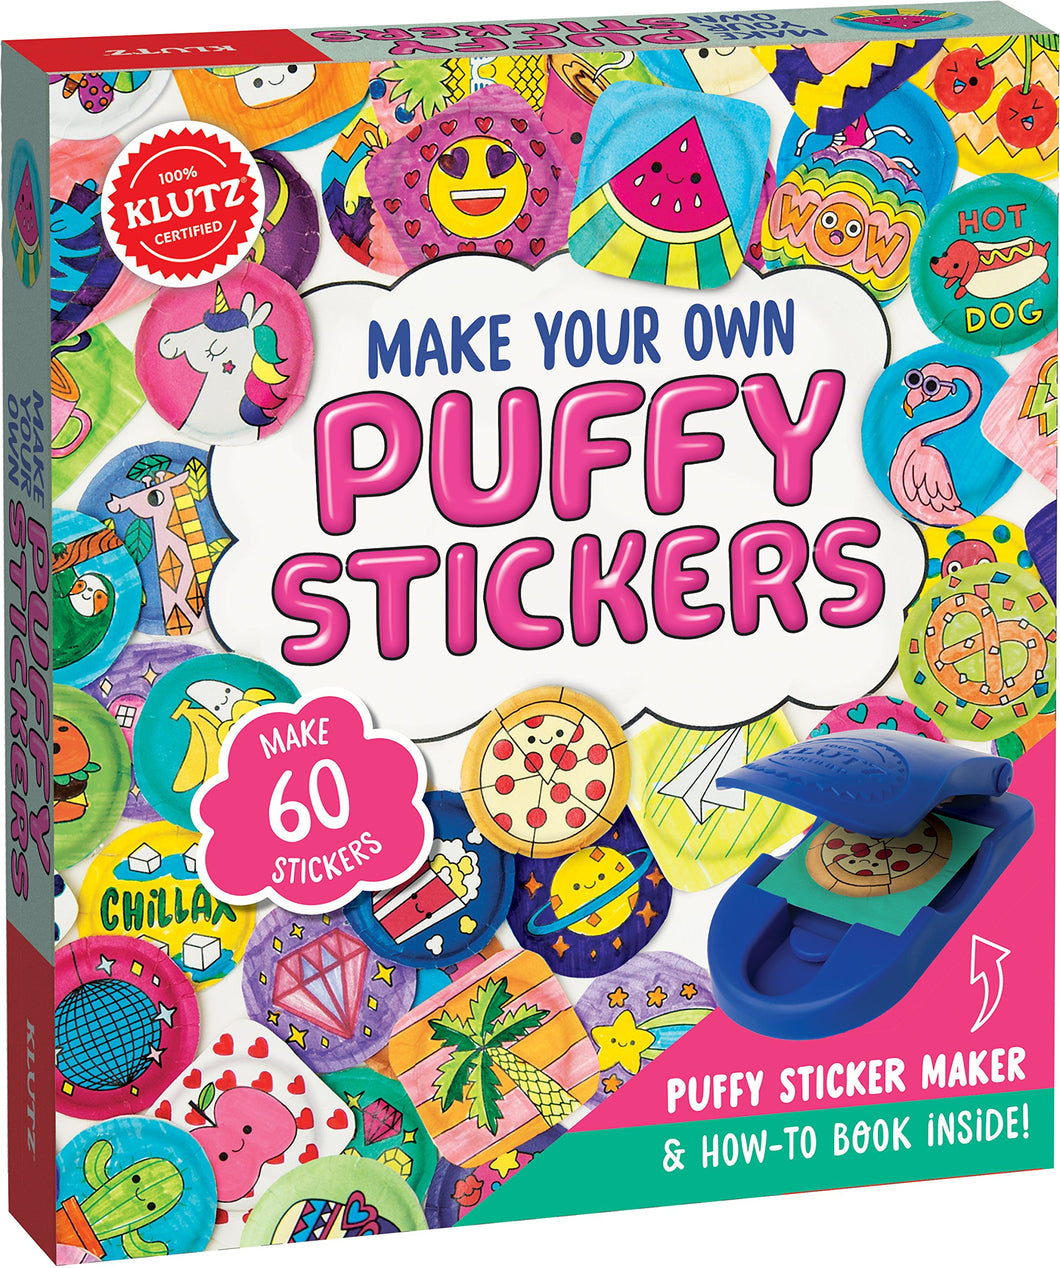 Make Your Own Puffy Stickers [Klutz Press]